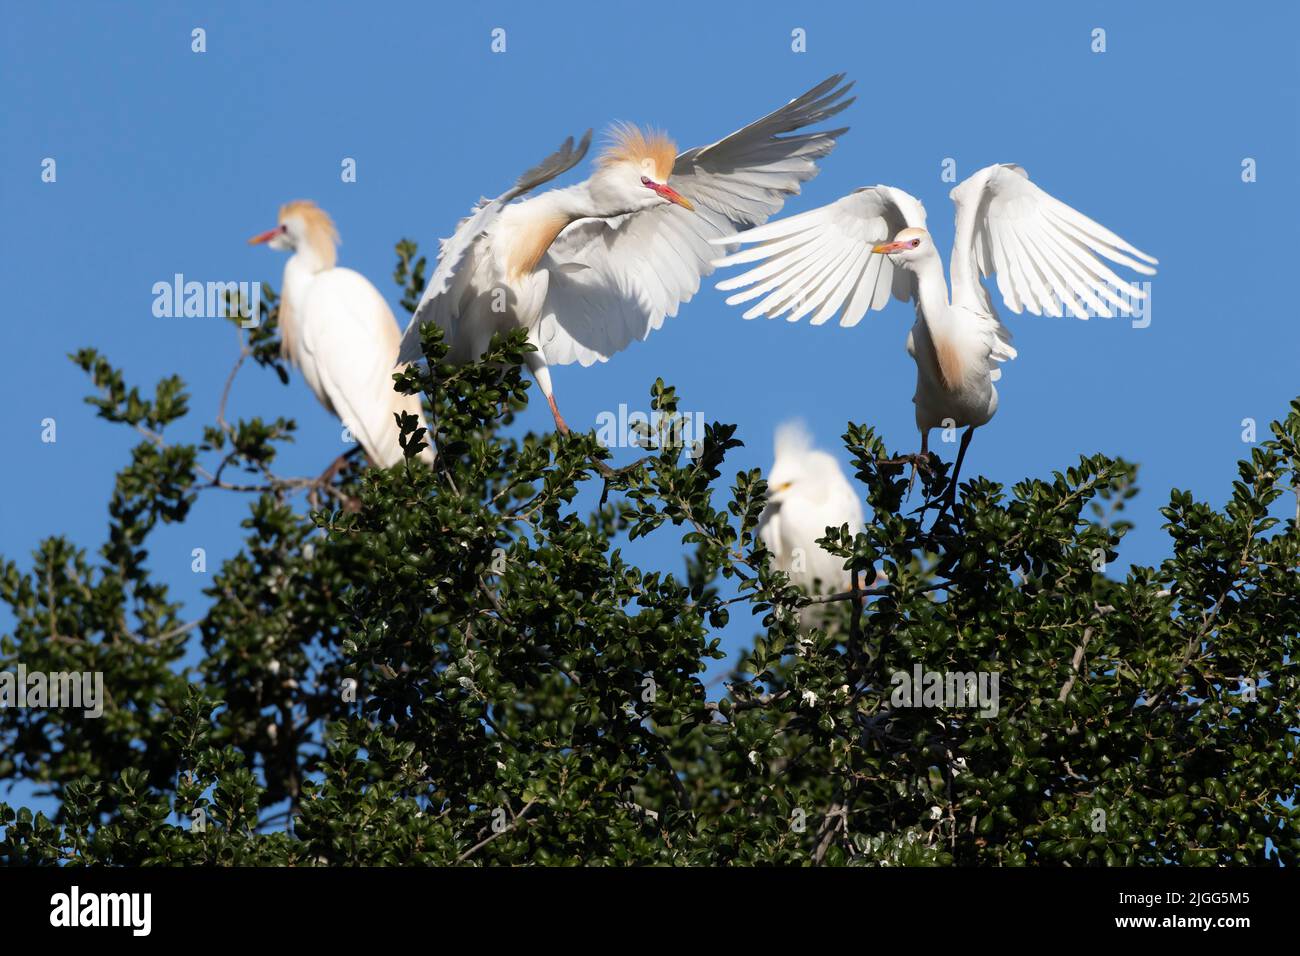 Cattle Egrets, Bubulcus ibis, fight for space atop a riparian nesting colony site in California's San Joaquin Valley. Stock Photo